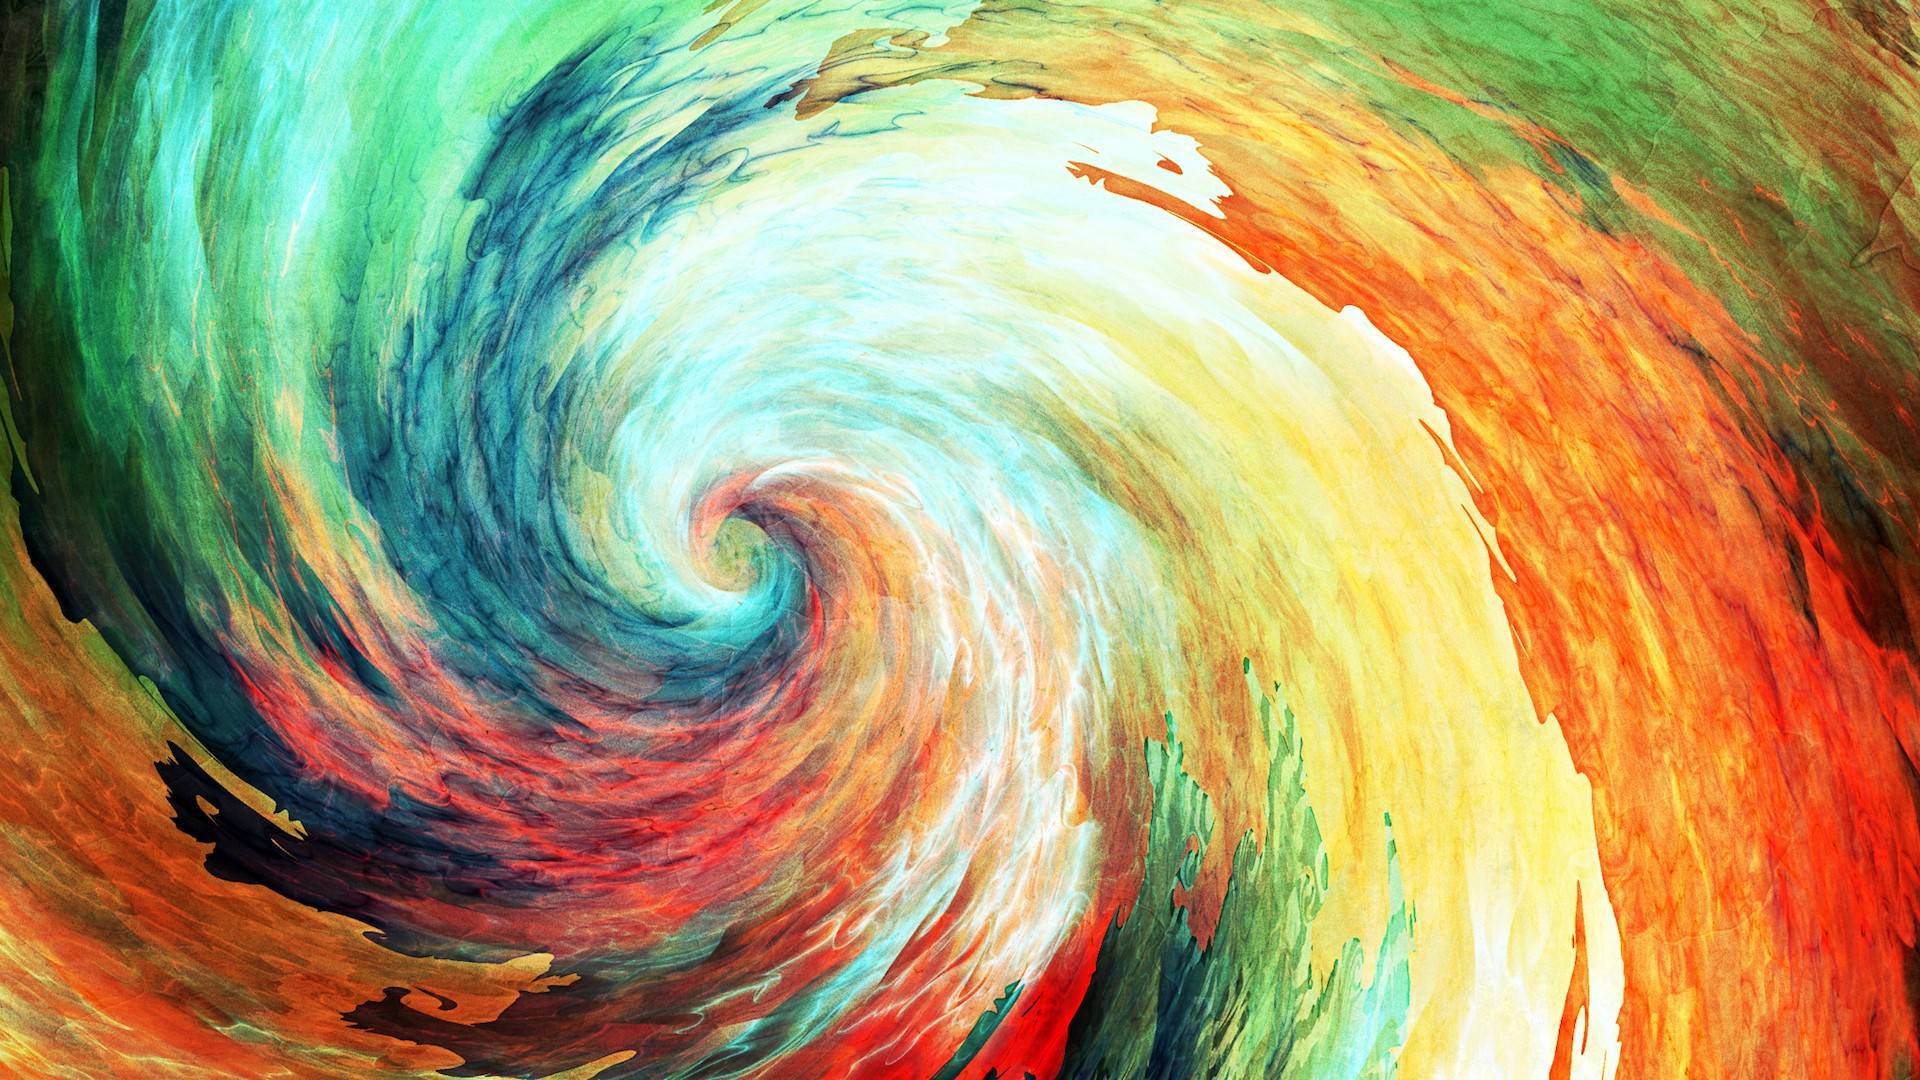 Abstract Art Spiral 1080p Animated Desktop Wallpaperpicture For